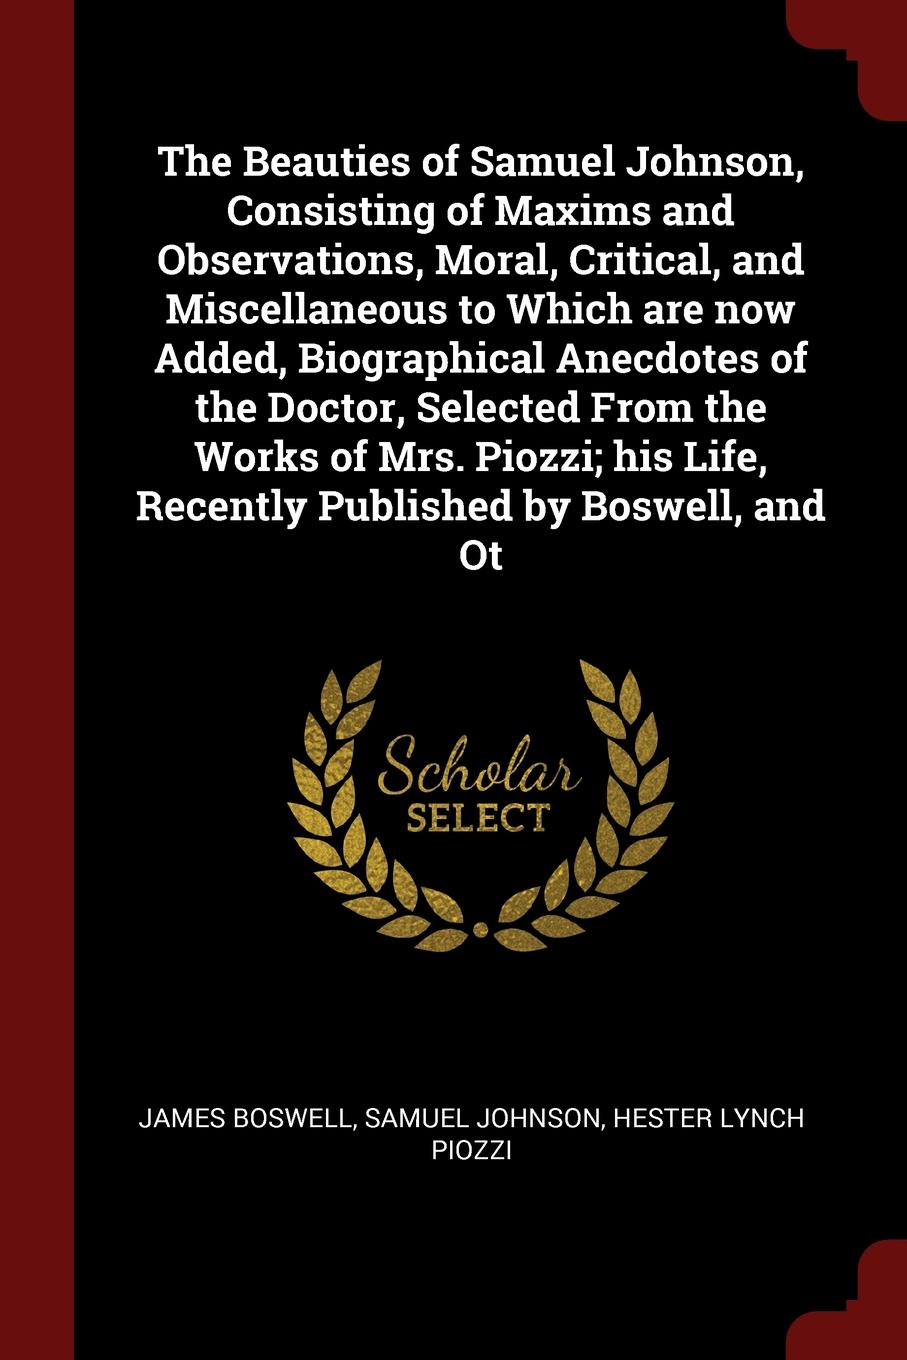 The Beauties of Samuel Johnson, Consisting of Maxims and Observations, Moral, Critical, and Miscellaneous to Which are now Added, Biographical Anecdotes of the Doctor, Selected From the Works of Mrs. Piozzi; his Life, Recently Published by Boswell...